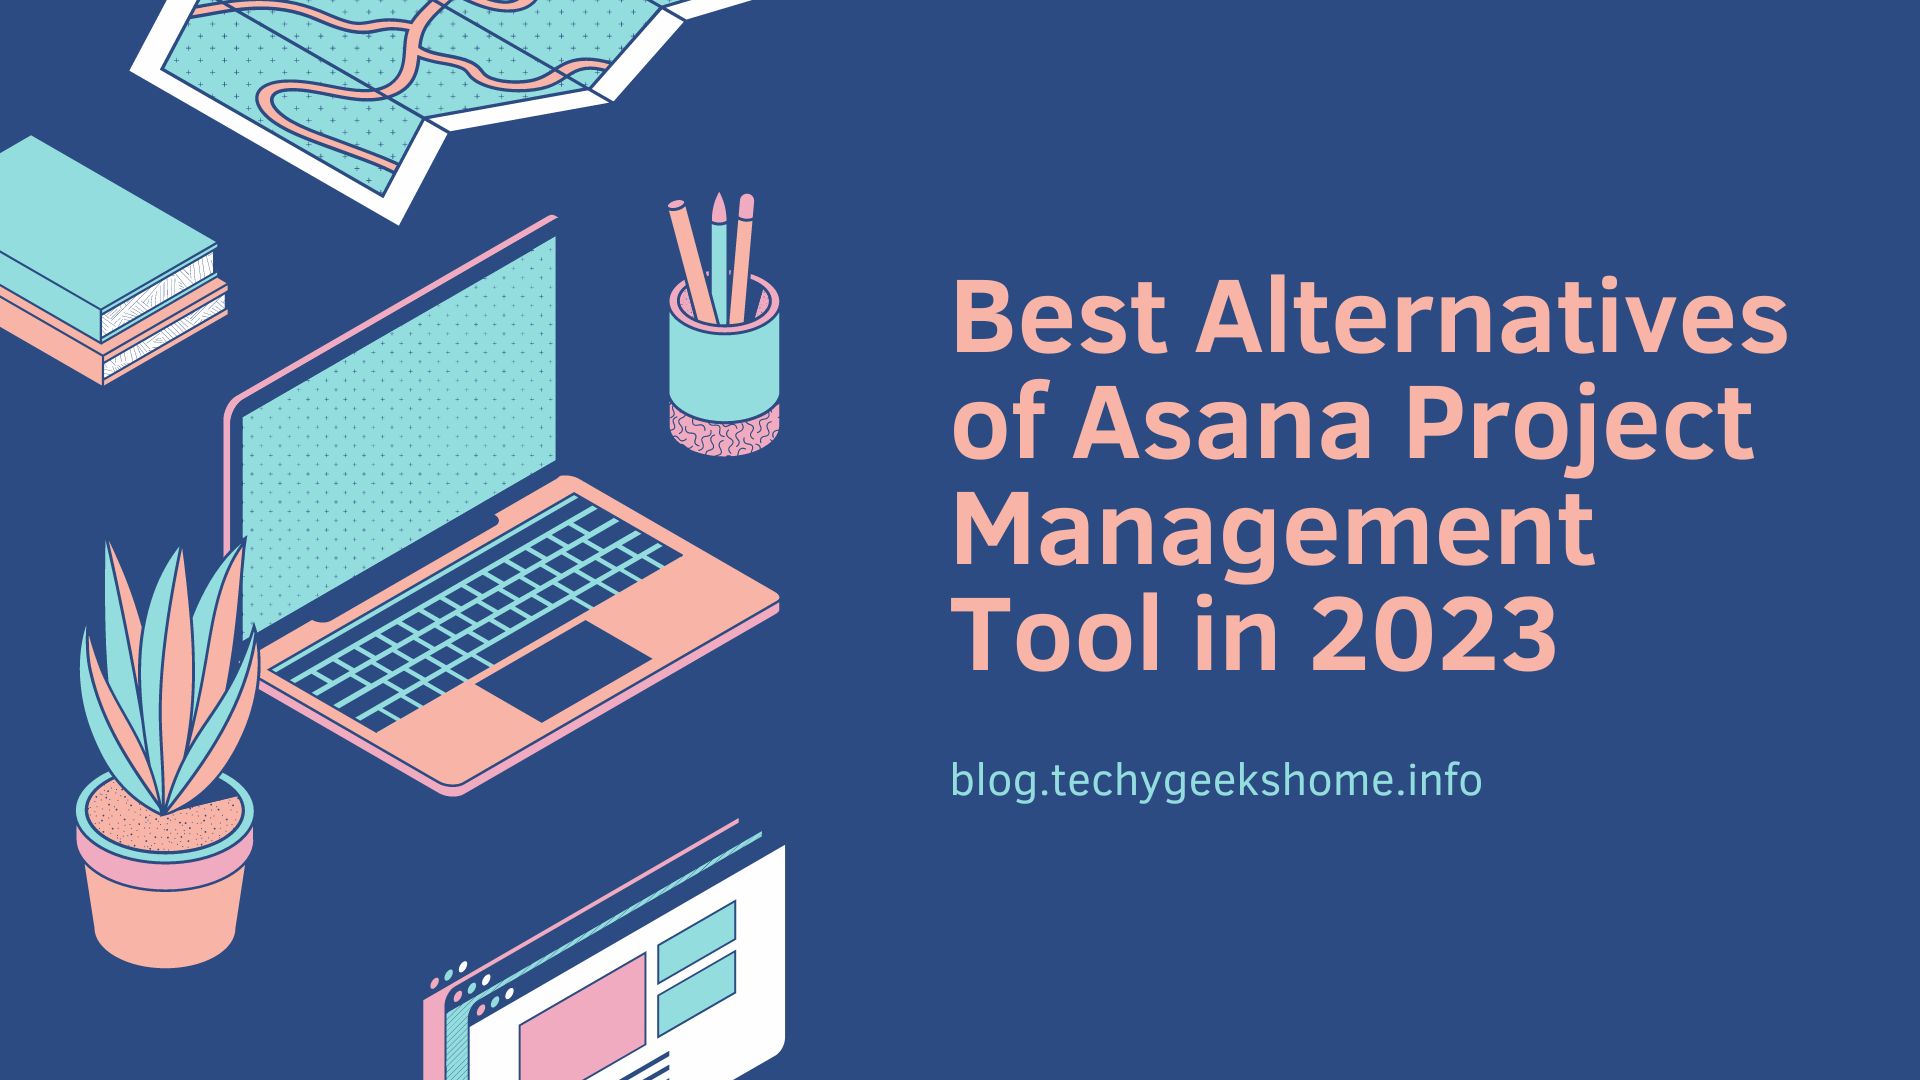 Best Alternatives of Asana Project Management Tool in 2023